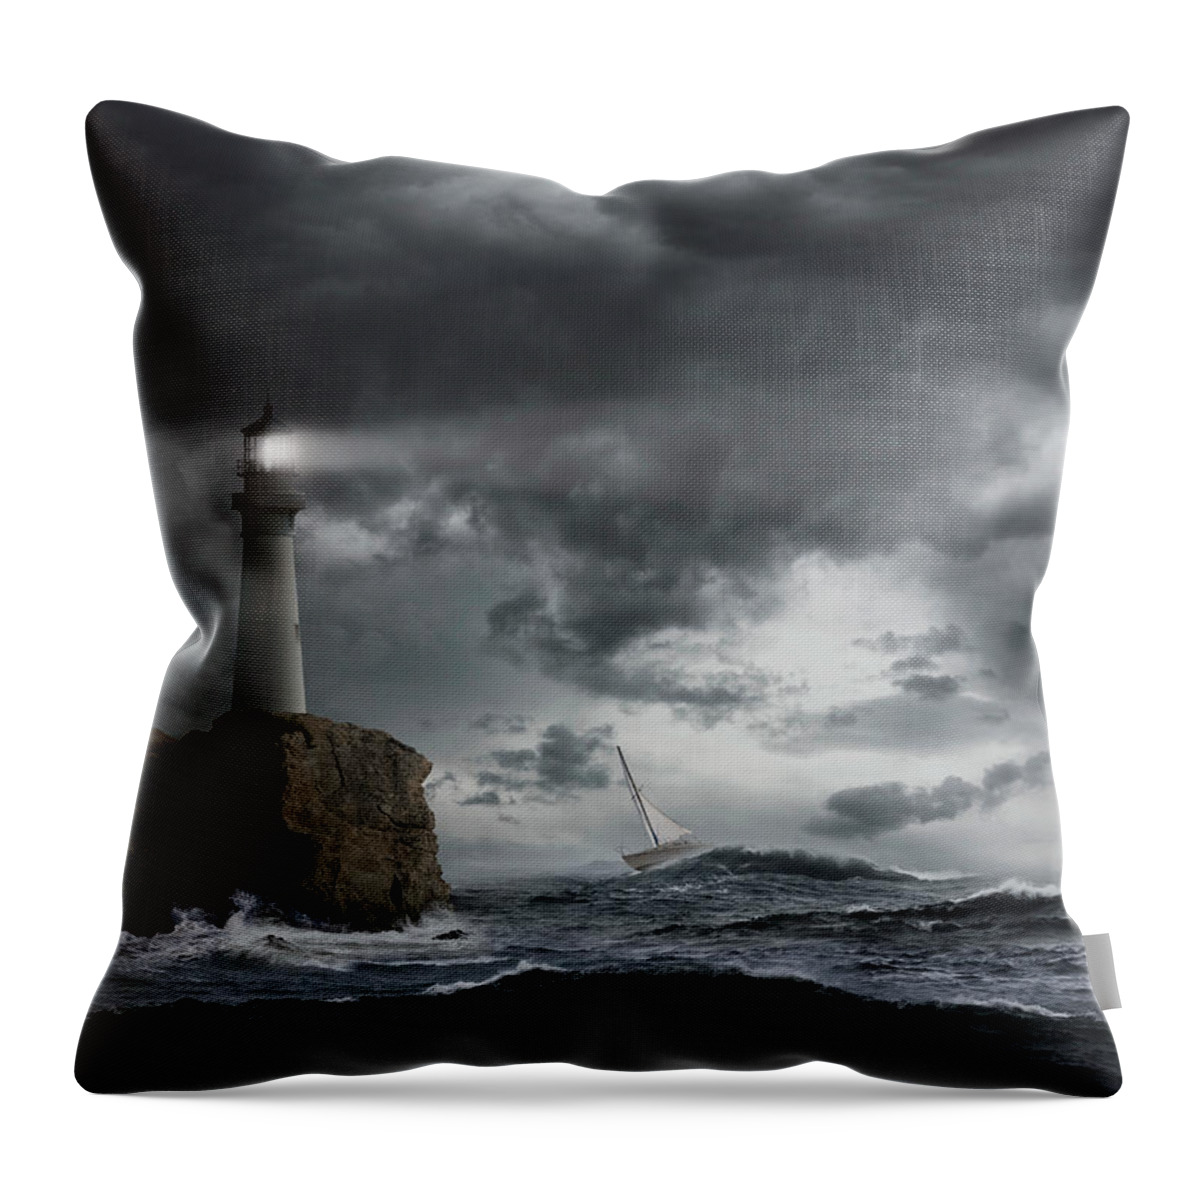 Risk Throw Pillow featuring the photograph Lighthouse Shining Over Stormy Ocean by John M Lund Photography Inc